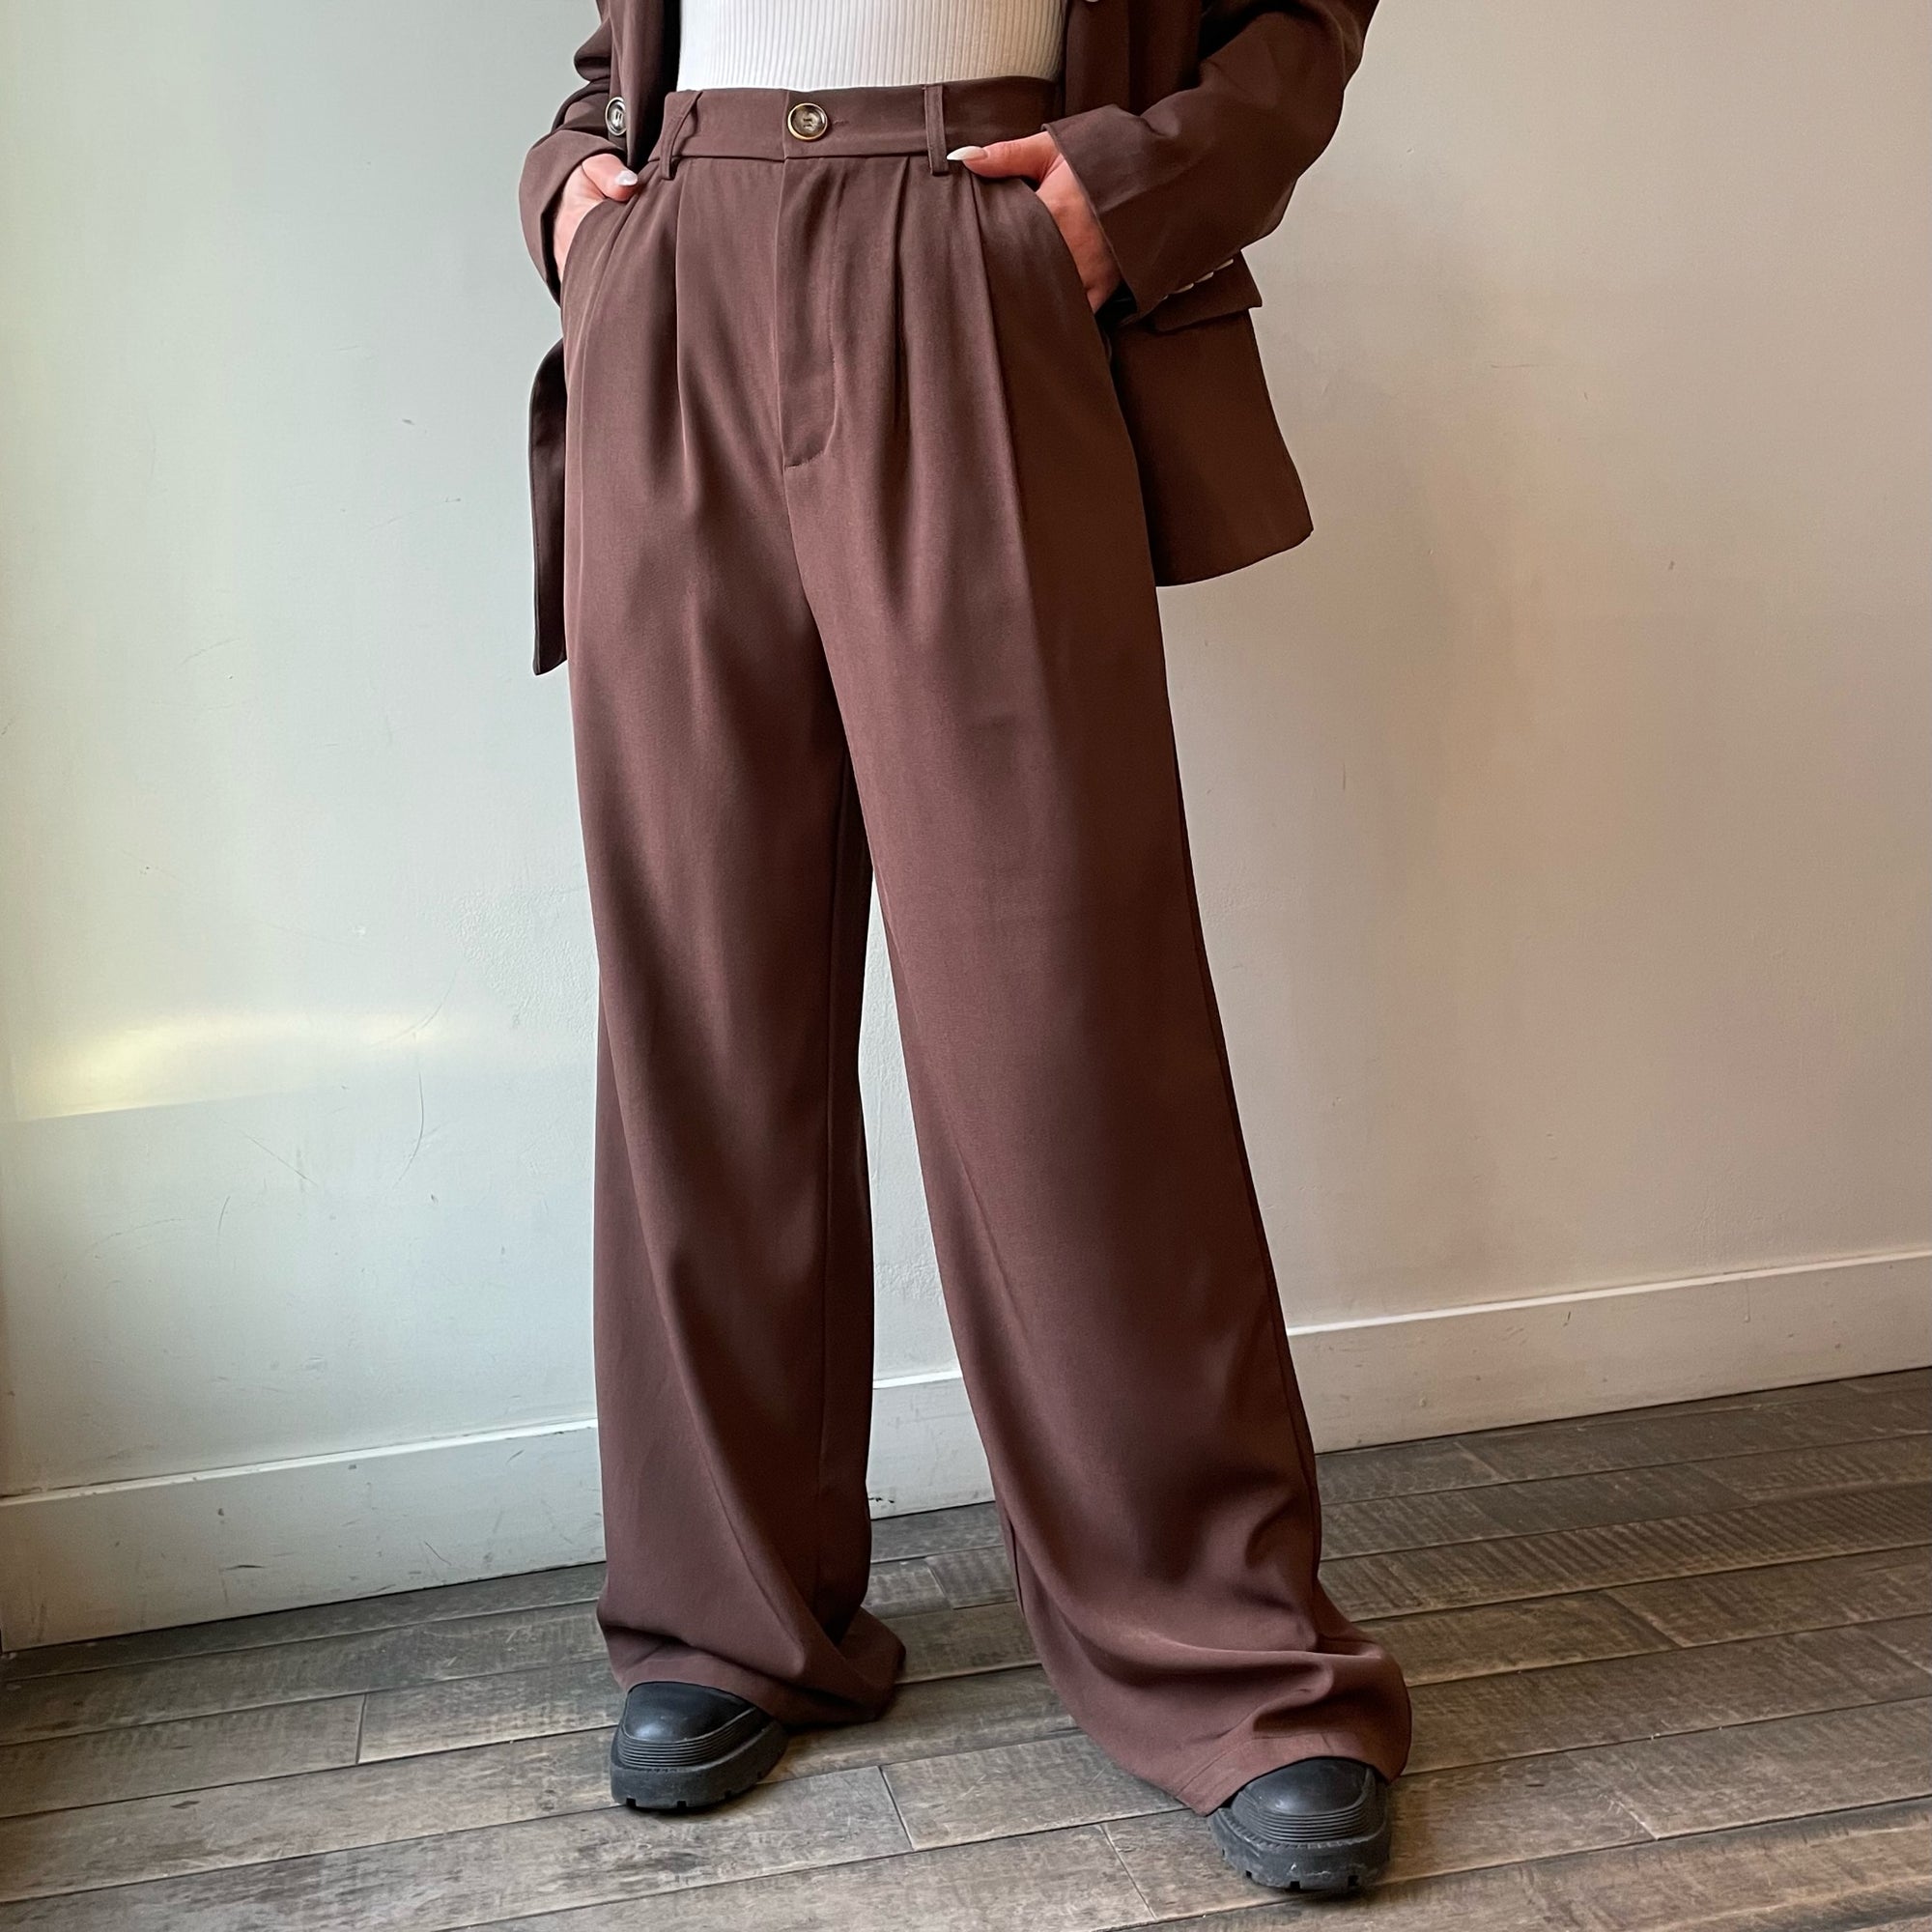 MAGDALENA Mens Style Trousers